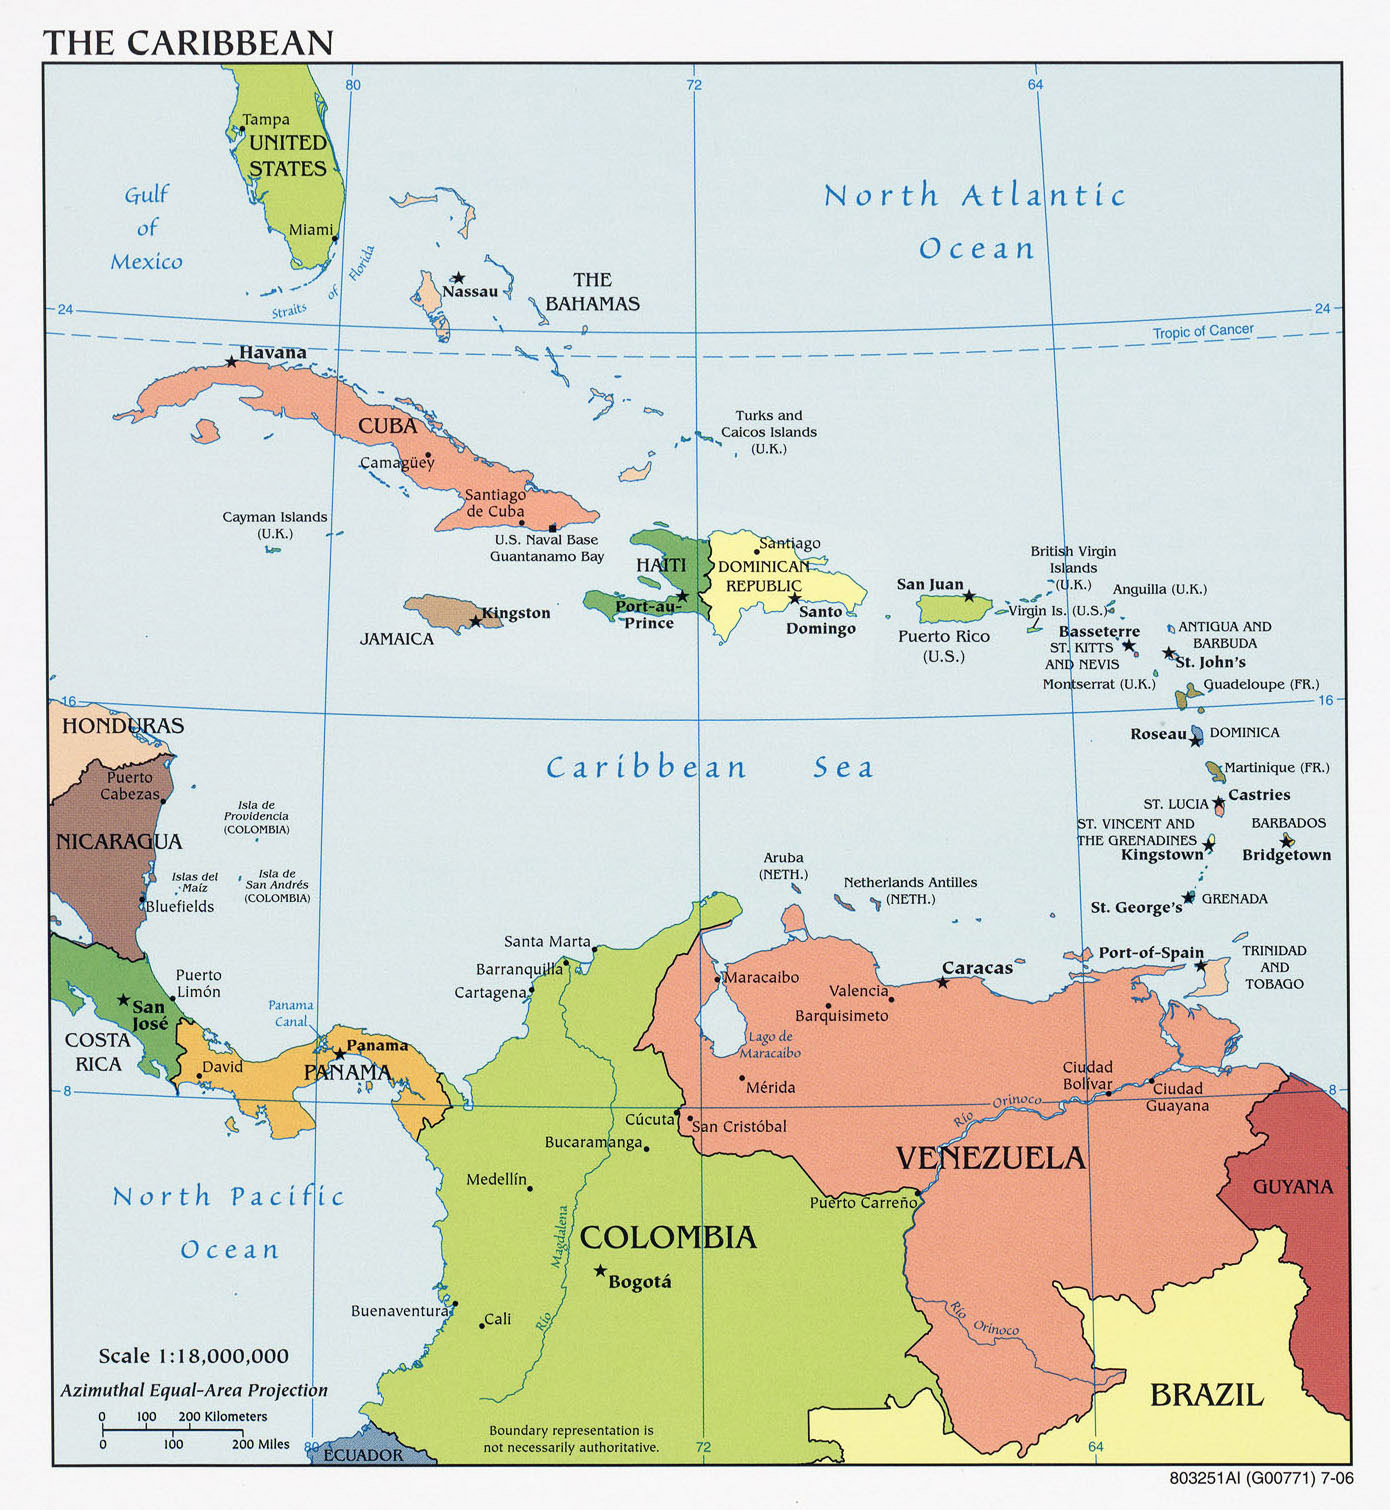 large_detailed_political_map_of_the_caribbean_with_capitals_and_major_cities_2006.jpg